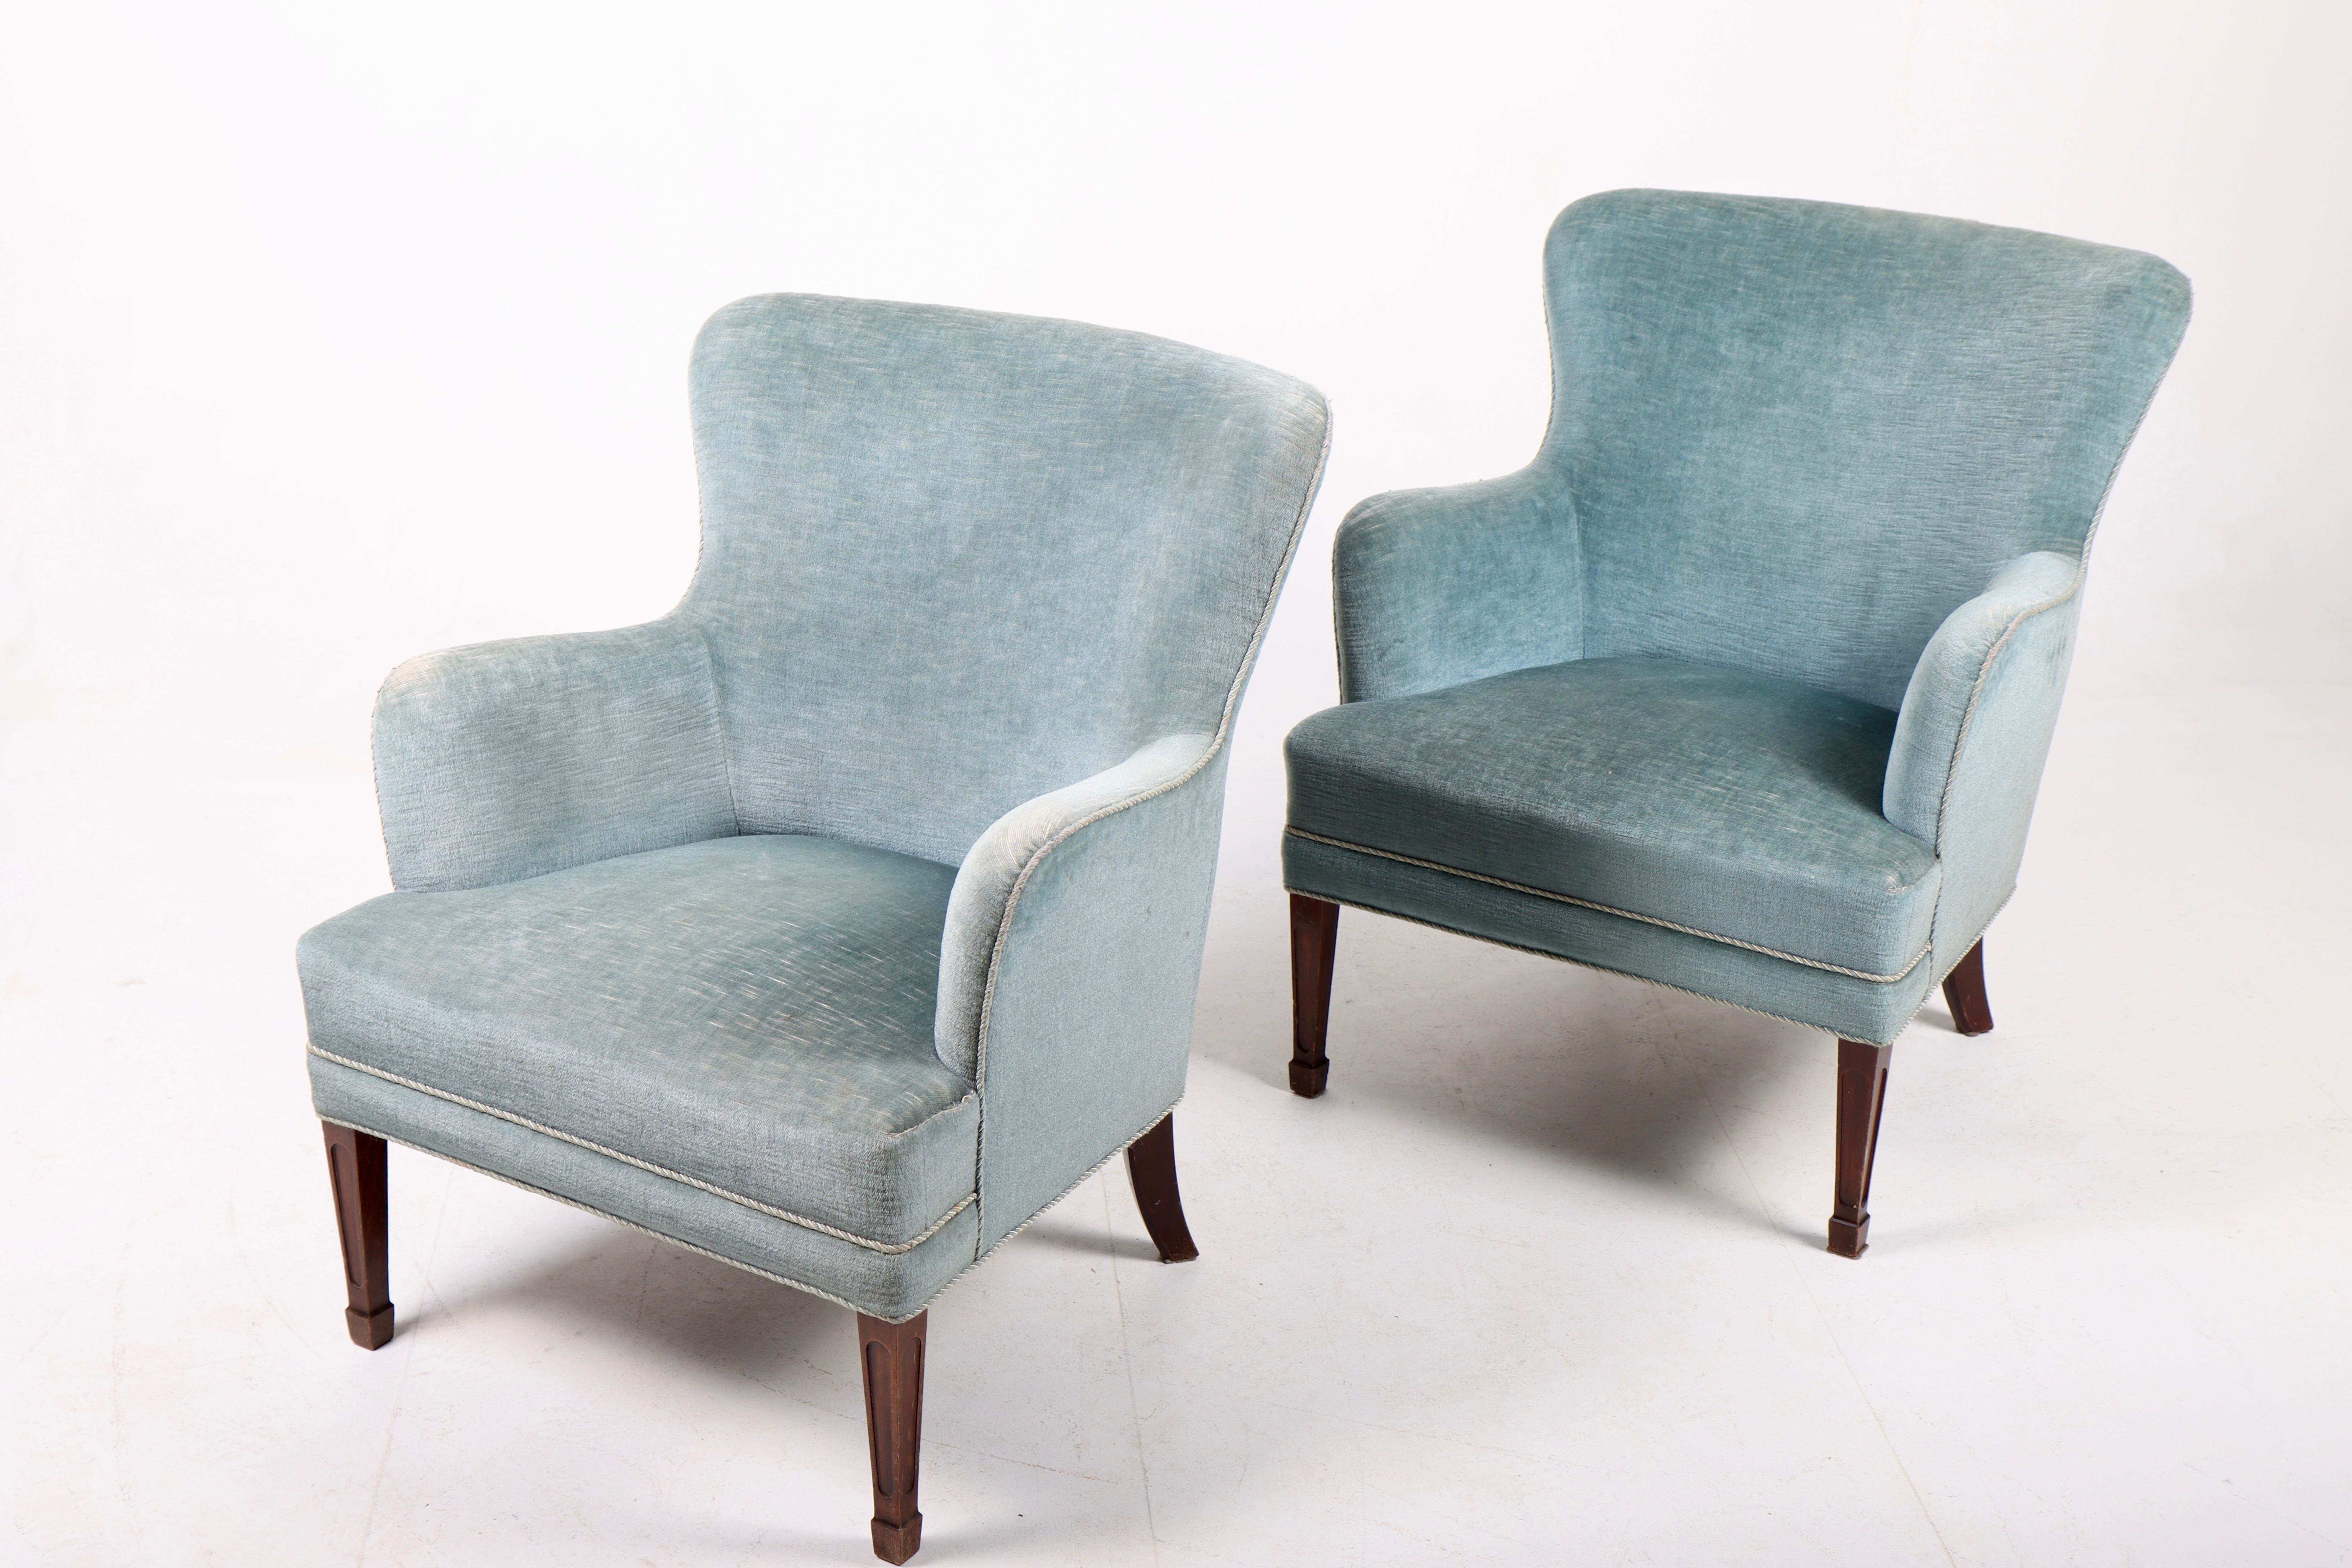 Danish Pair of Midcentury Lounge Chairs by Frits Henningsen, 1950s